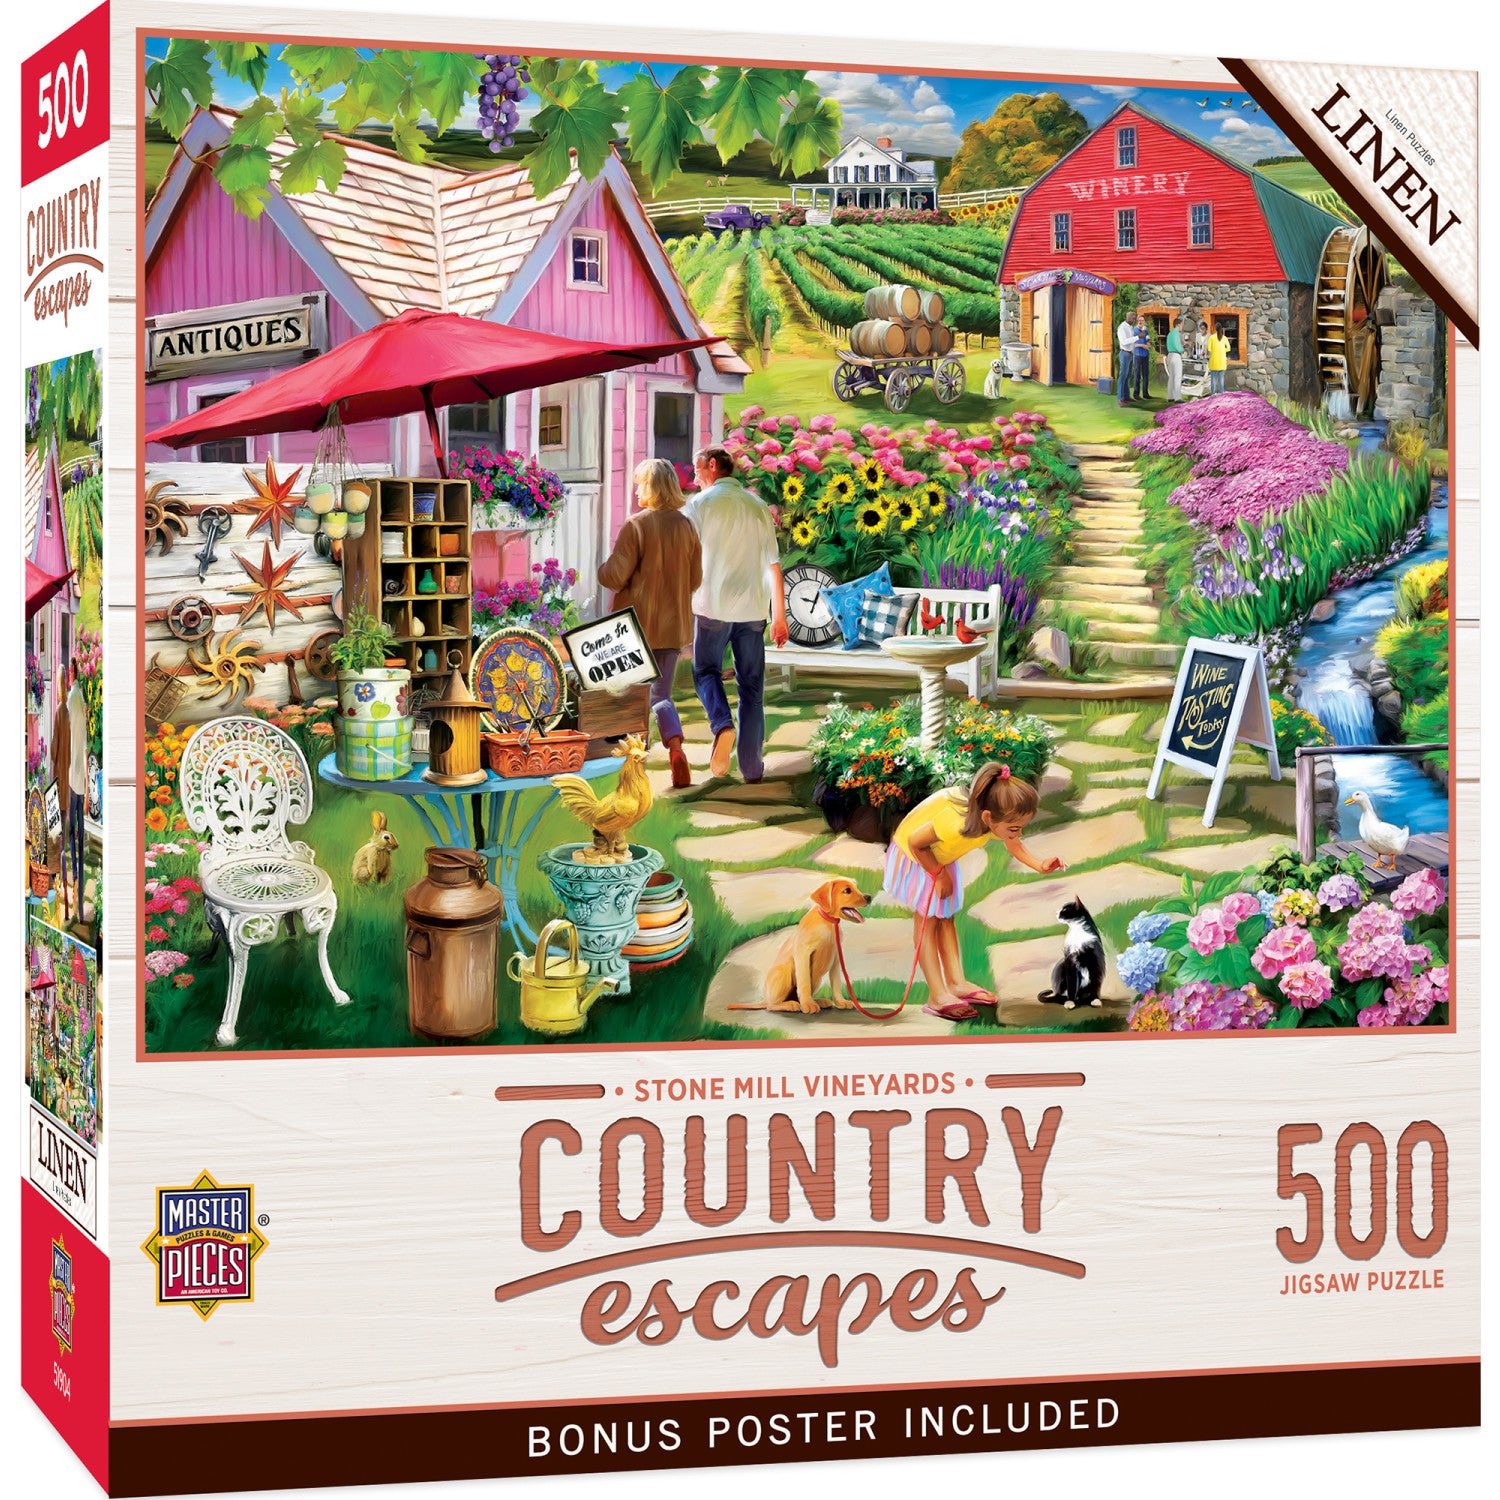 Country Escapes - Stone Mill Vineyards 500 Piece Jigsaw Puzzle